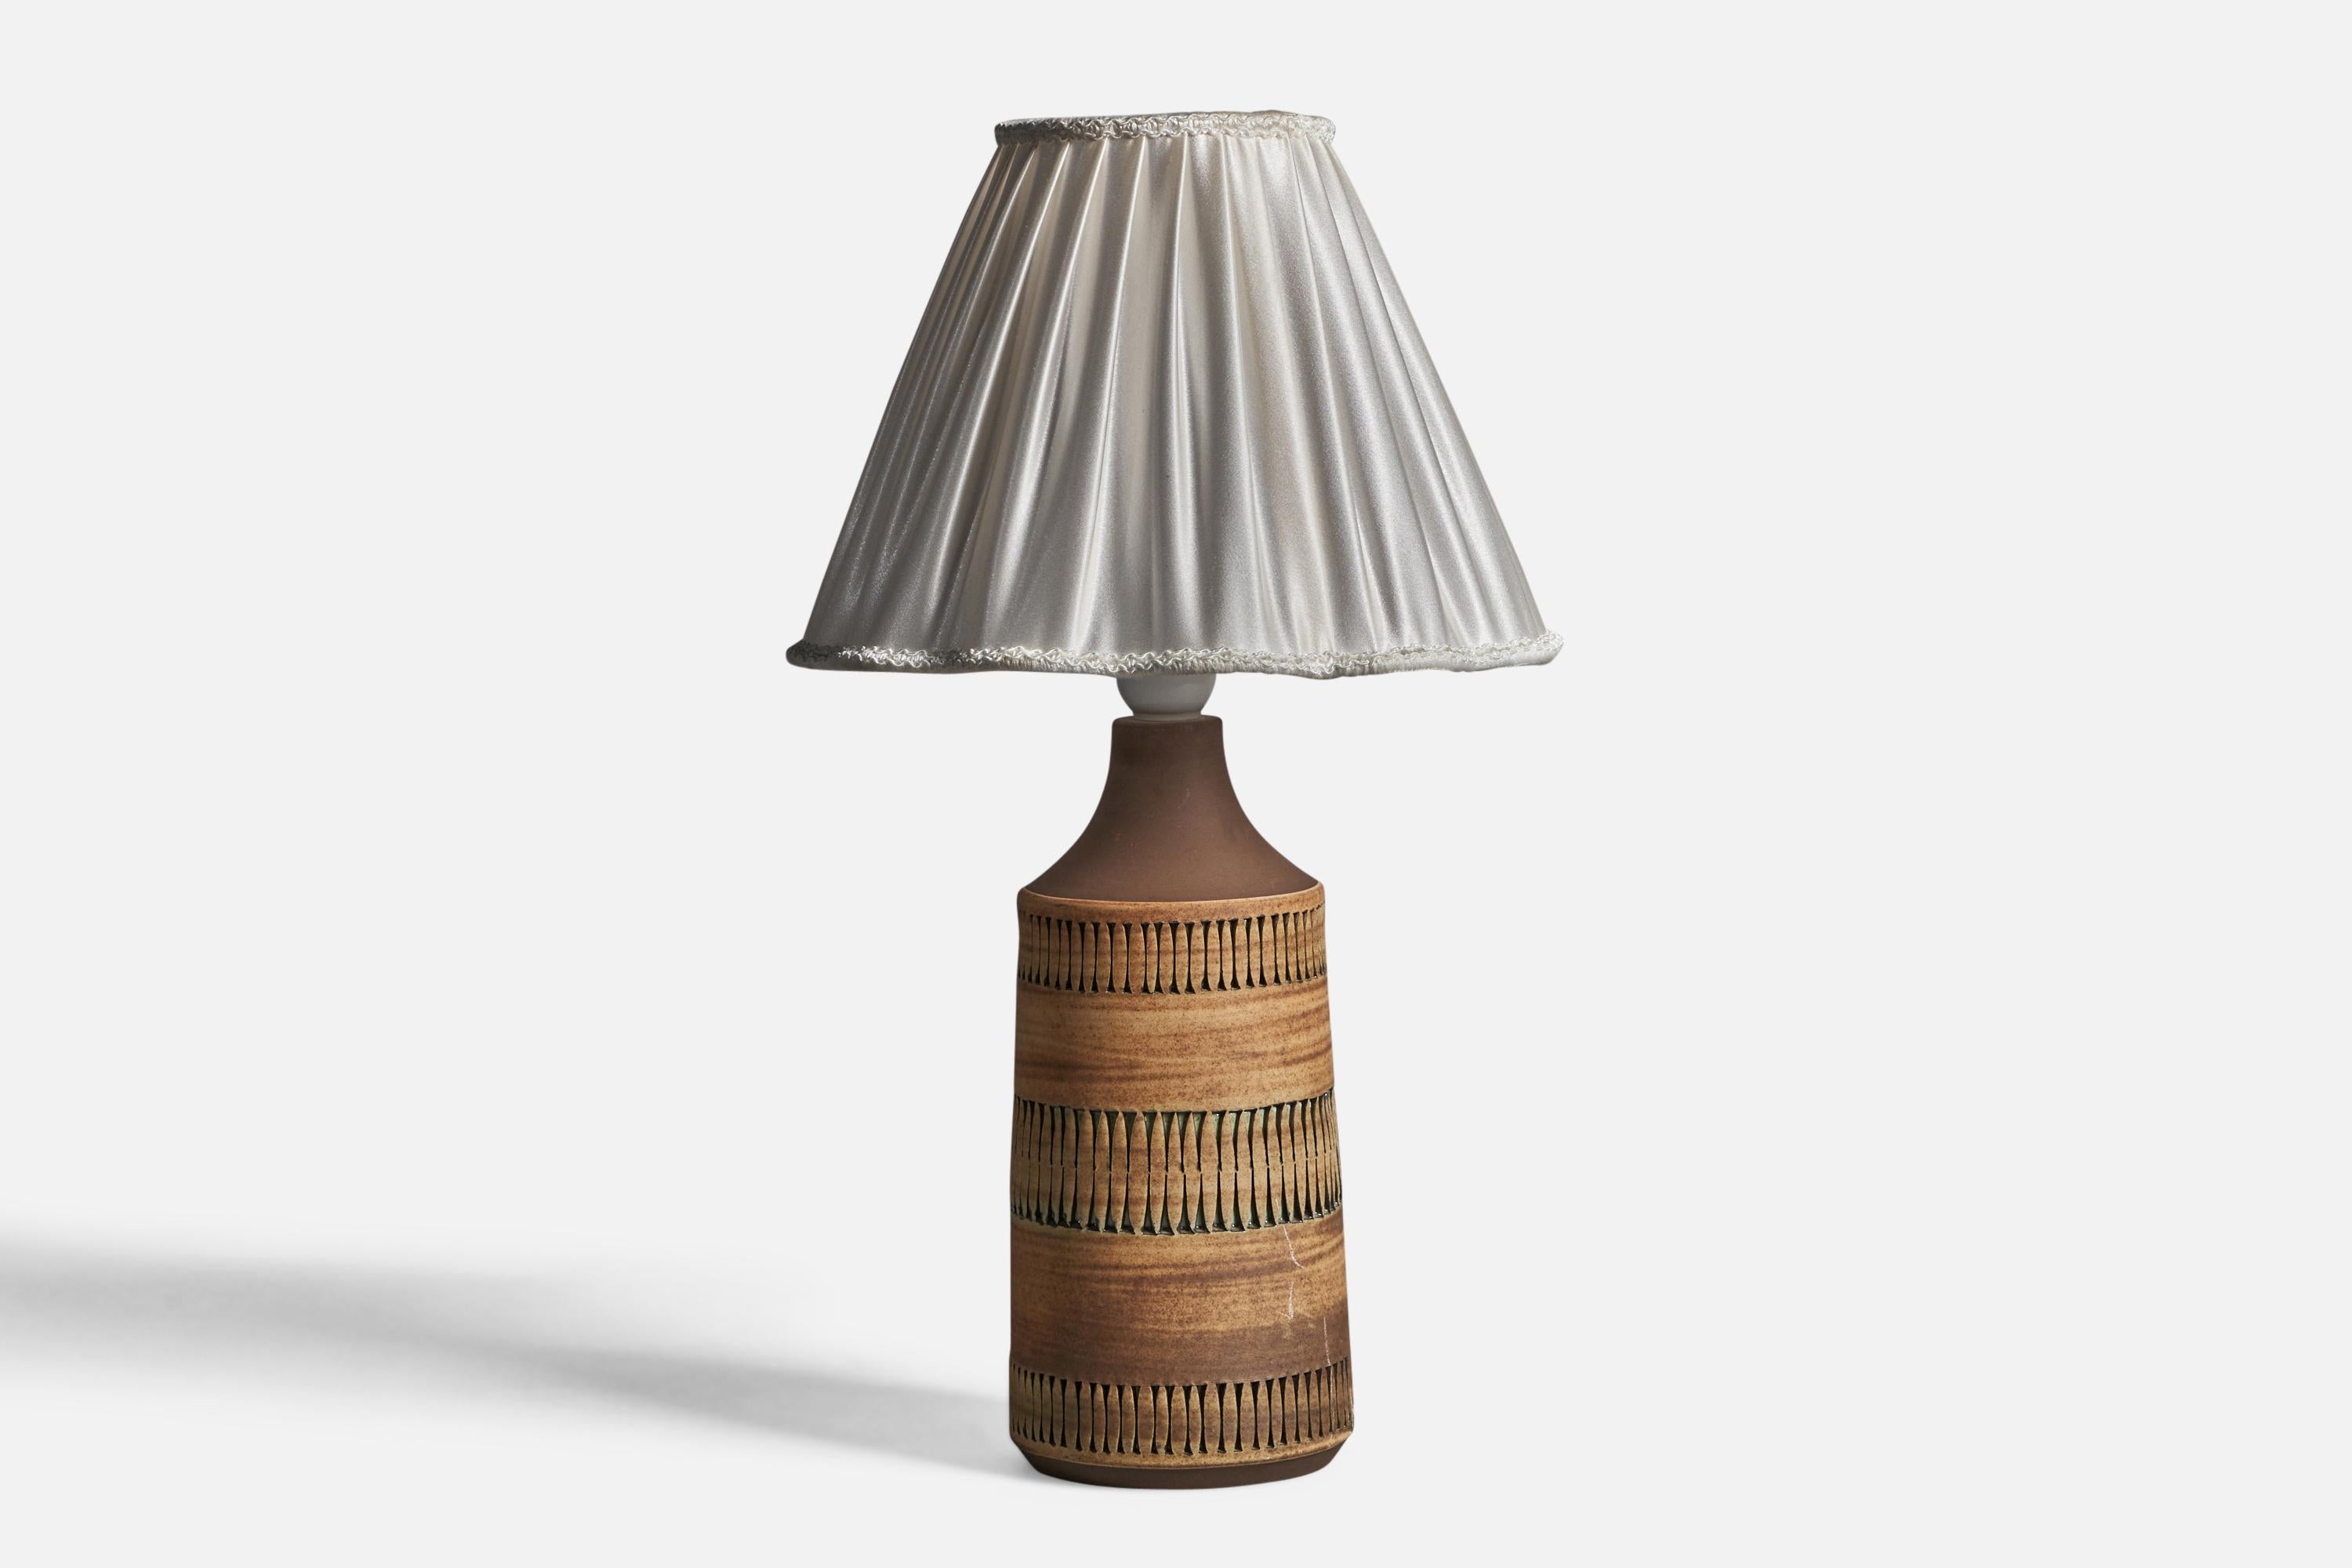 A beige brown incised stoneware and fabric table lamp, designed and produced by Tomas Anagrius, Sweden, 1960s.

Overall Dimensions (inches): 18